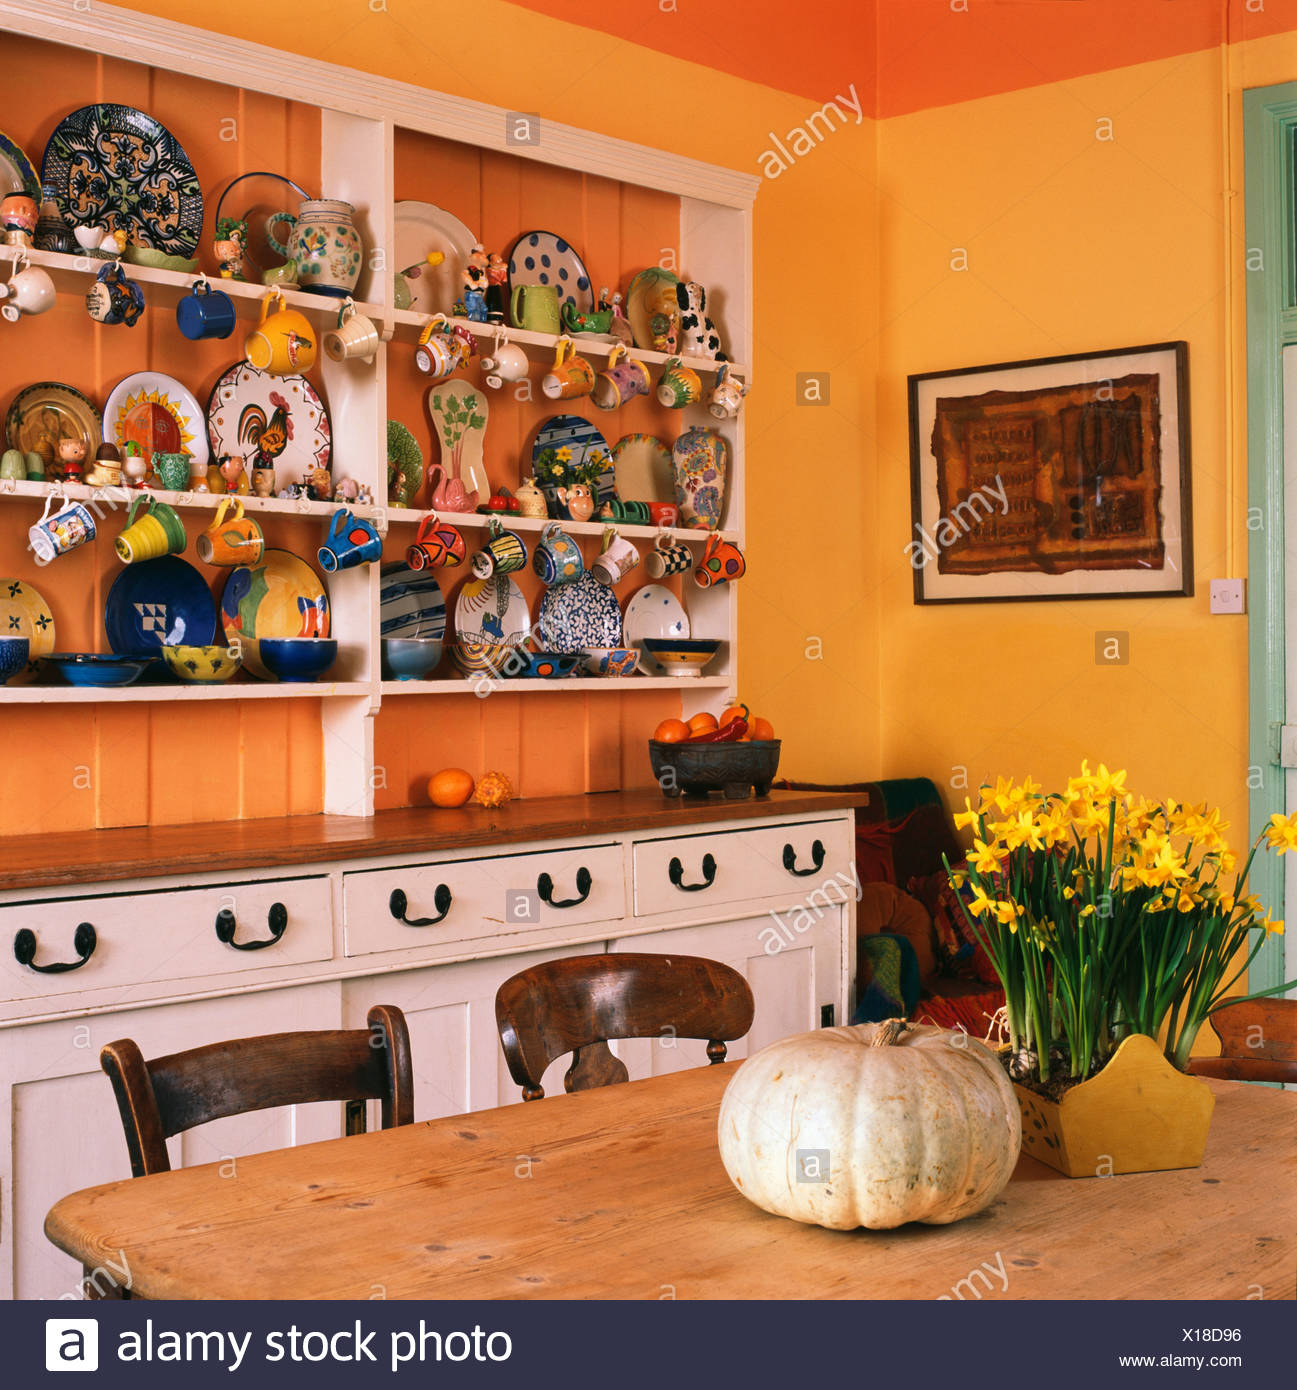 Colourful Crockery On White Dresser In Orange Dining Room With